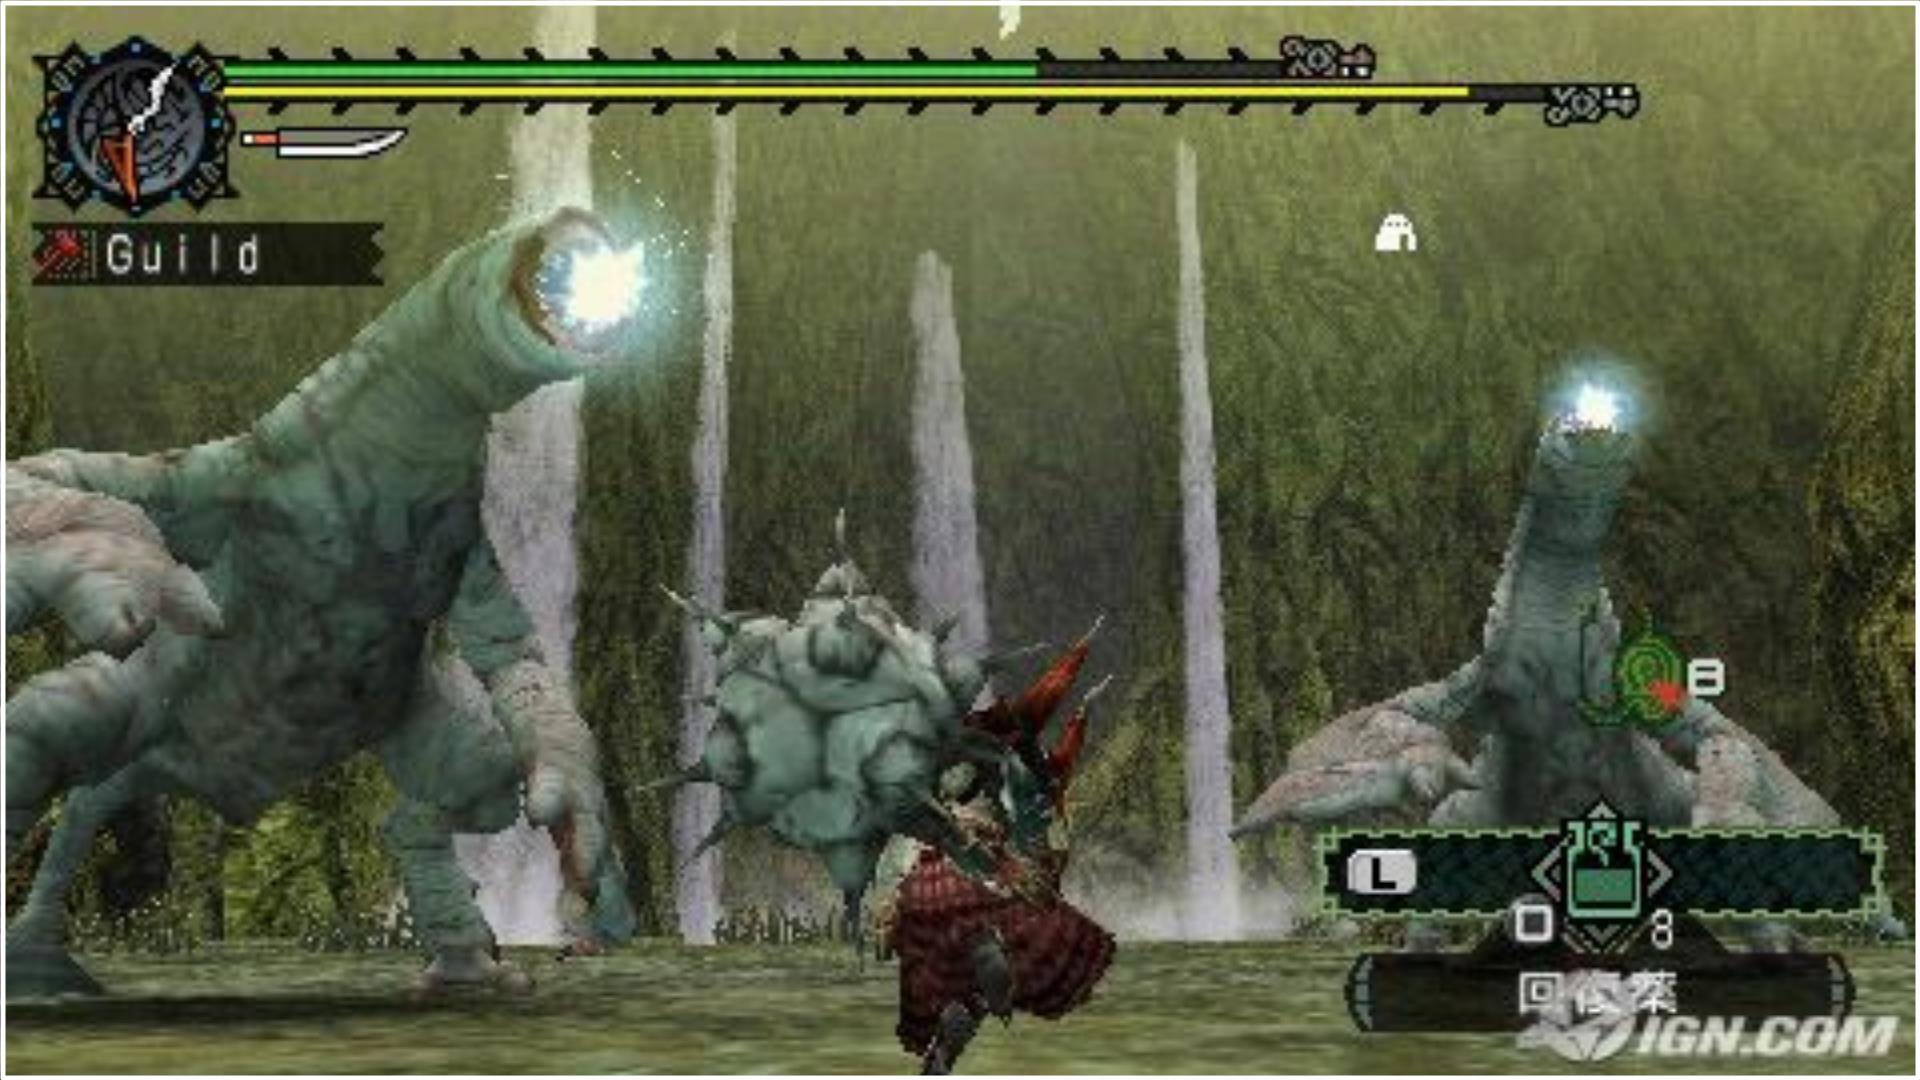 Monster Hunter Freedom Unite, IOS, PSP, Vita, ISO, ROM, Monster List,  Weapons, Wiki, Tips, Cheats, Game Guide Unofficial eBook by Hse Guides -  EPUB Book